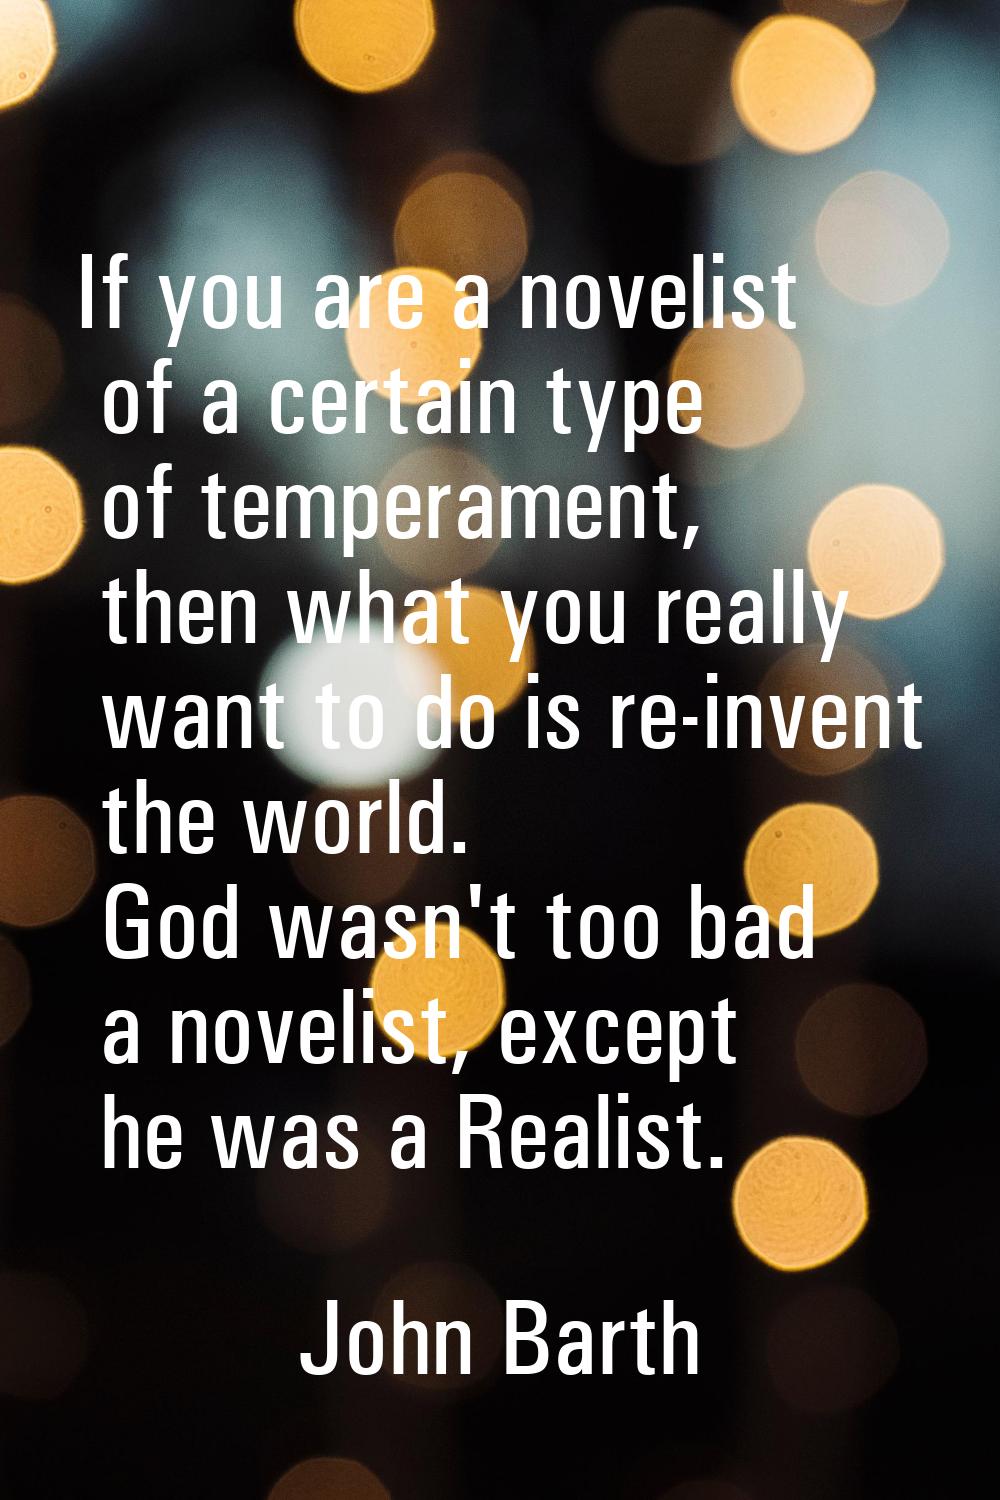 If you are a novelist of a certain type of temperament, then what you really want to do is re-inven